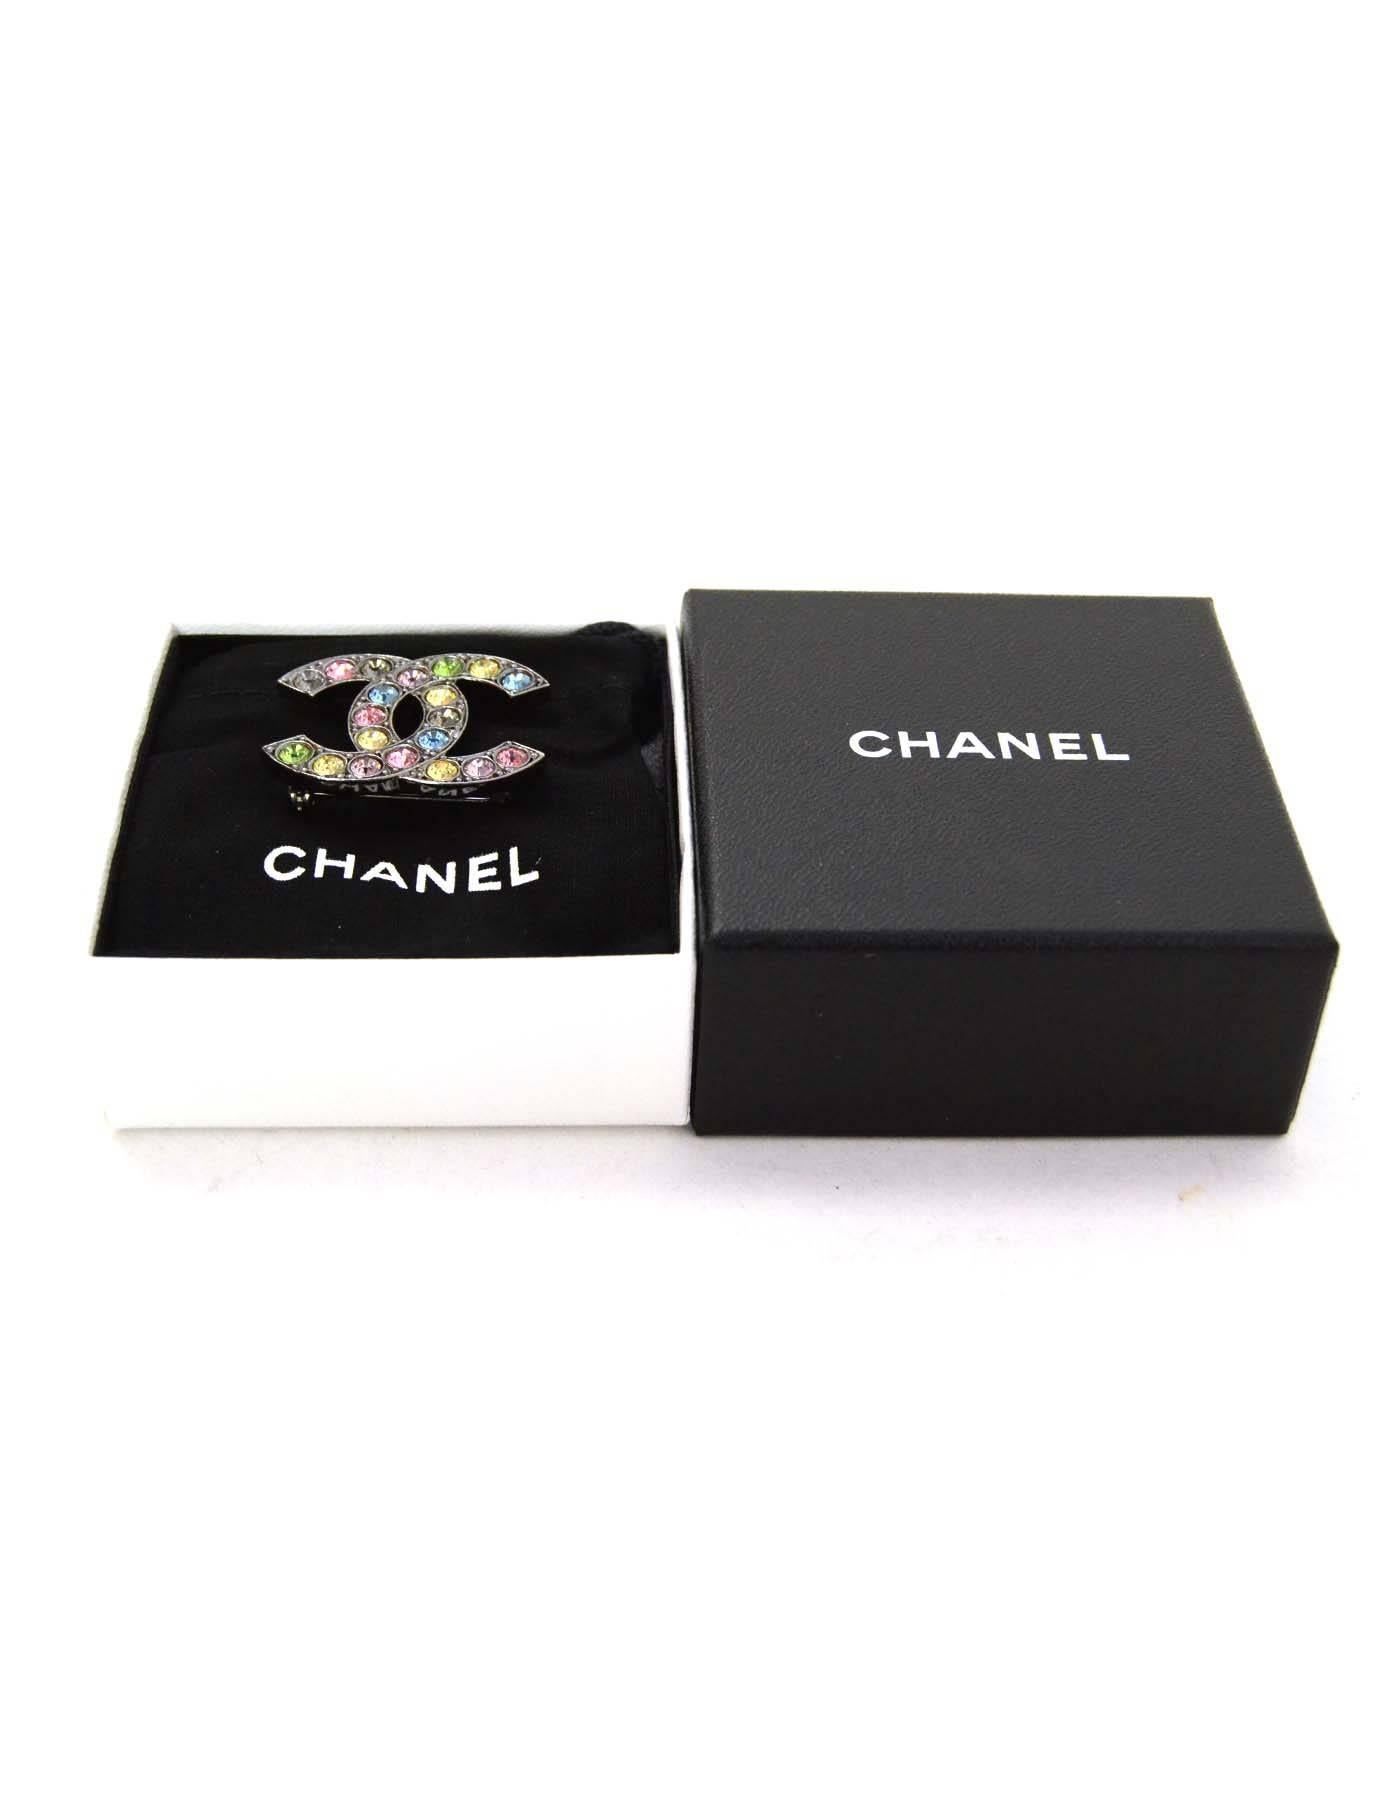 Women's Chanel Multicolored Tutti Fruitti Crystal CC Brooch with Box and Dust bag